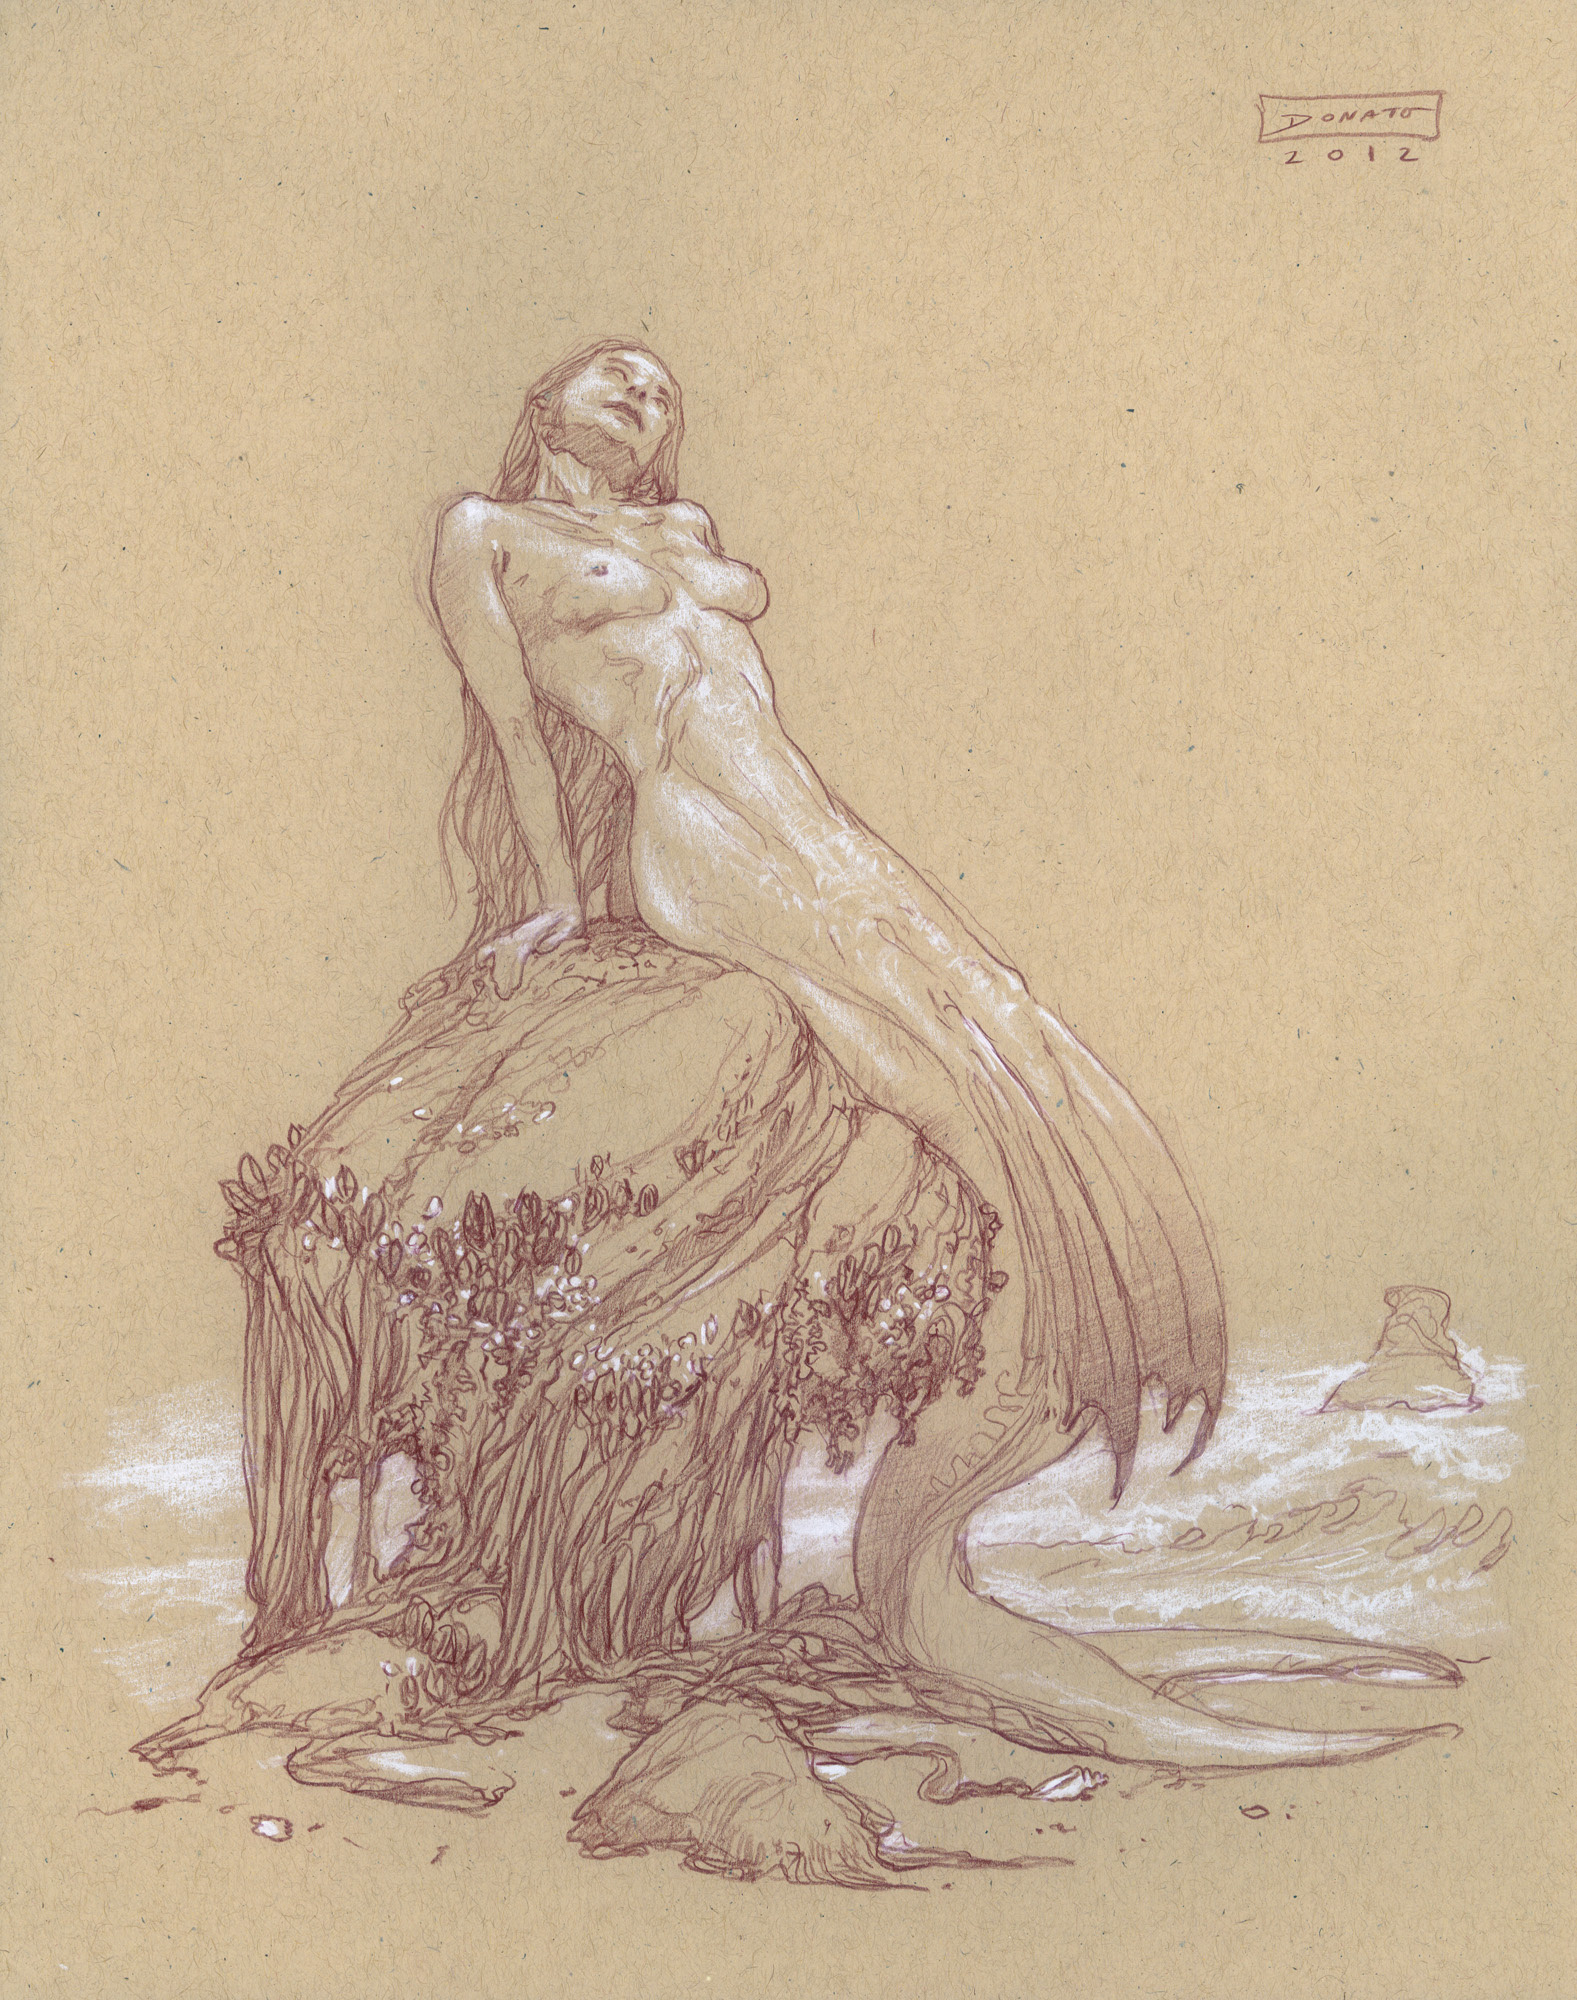 Mermaid - Curiosity14" x 11"  Watercolor Pencil and Chalk on Toned Paper
original art available for purchase